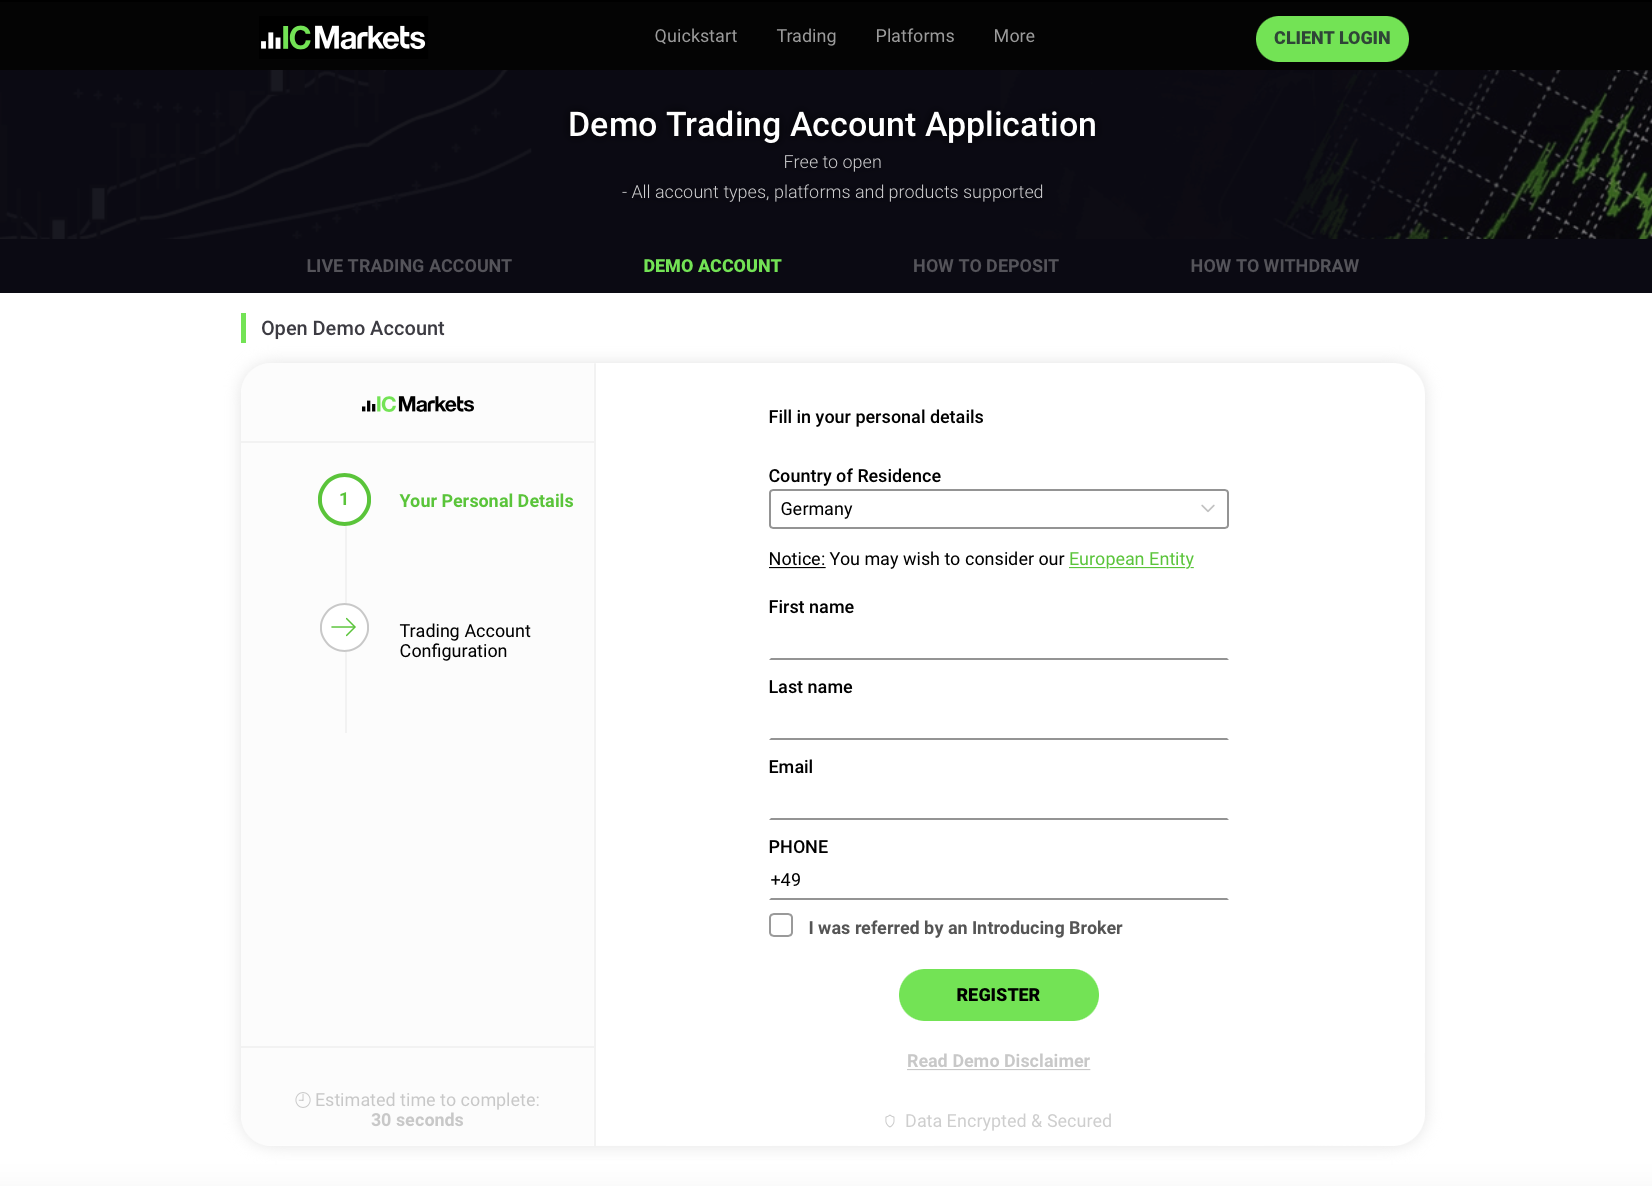 The IC markets demo account opening procedure